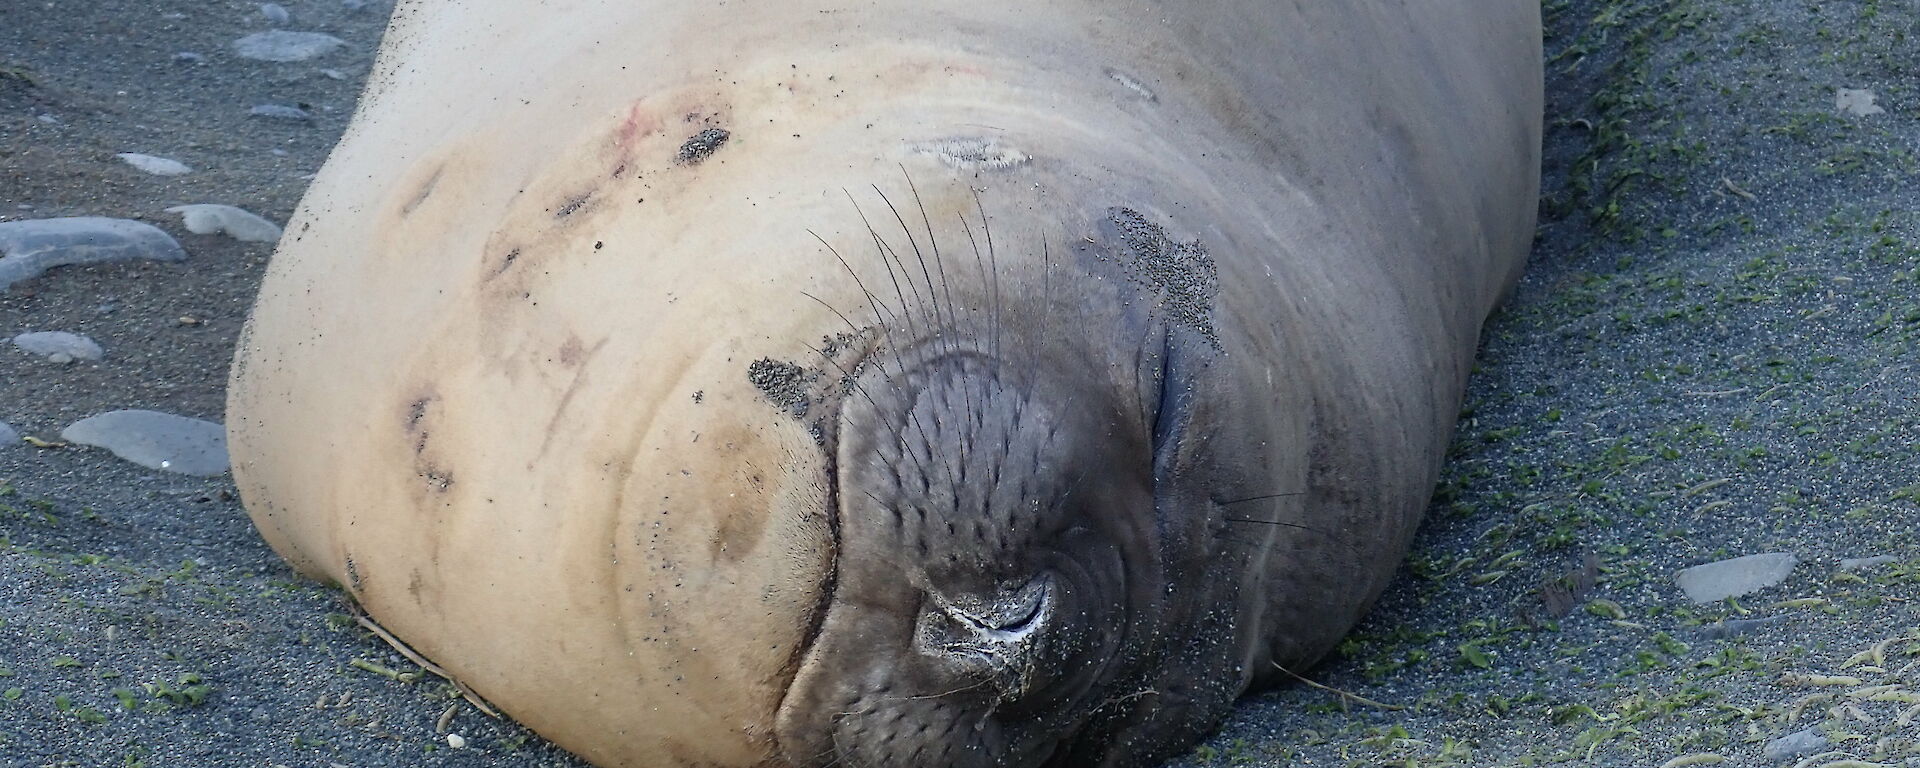 A young male elephant seal asleep on the isthmus, Macquarie Island